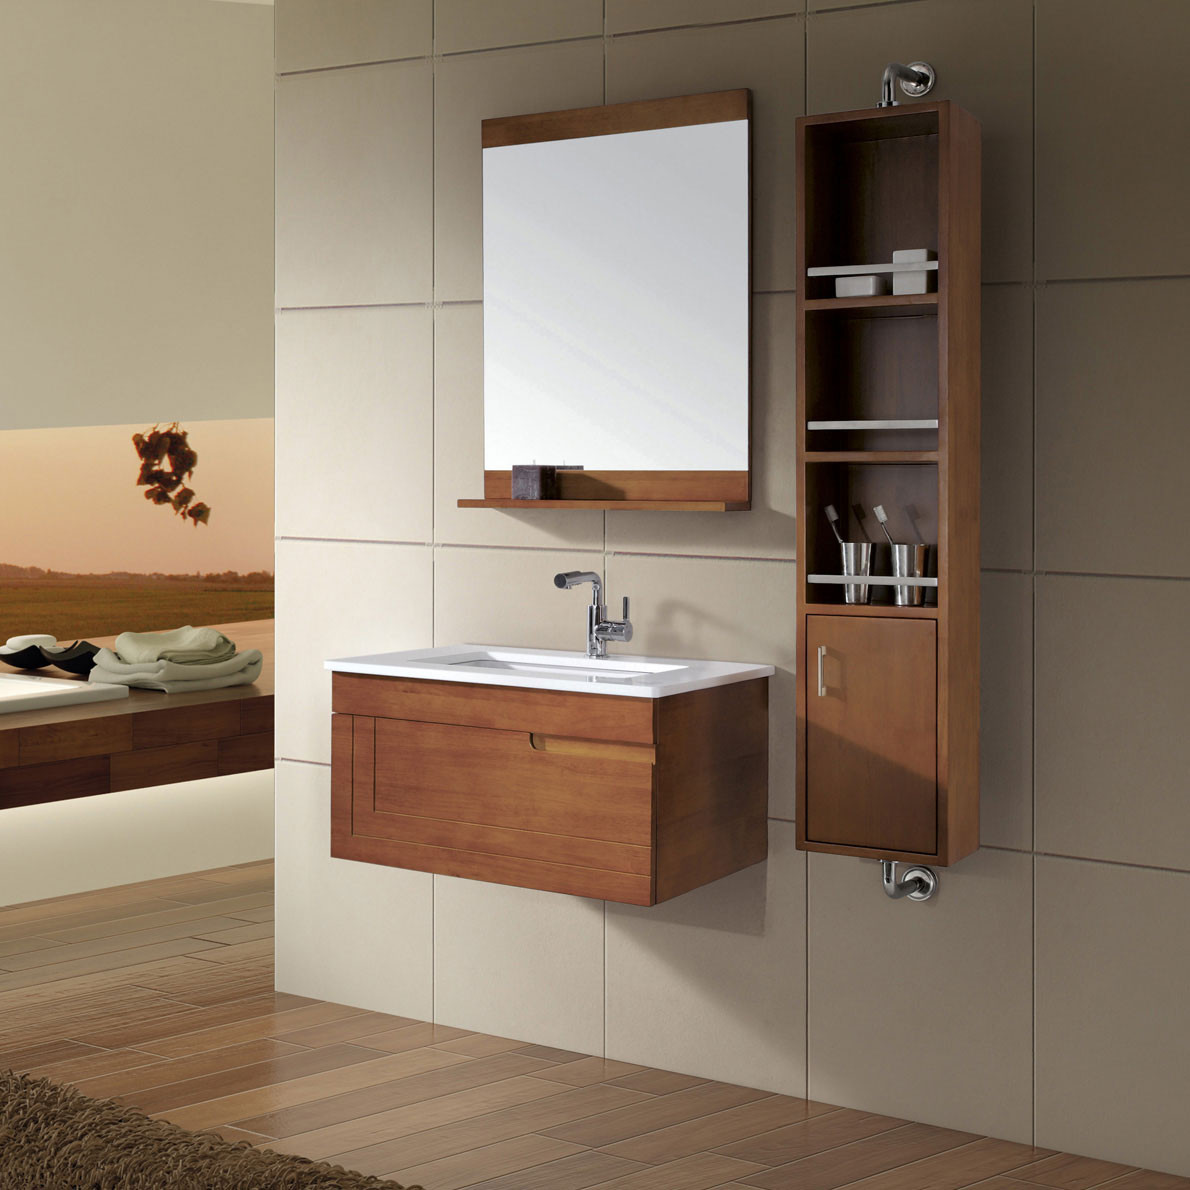 Bathroom Cabinet Designs Best Of Various Bathroom Cabinet Ideas and Tips for Dealing with